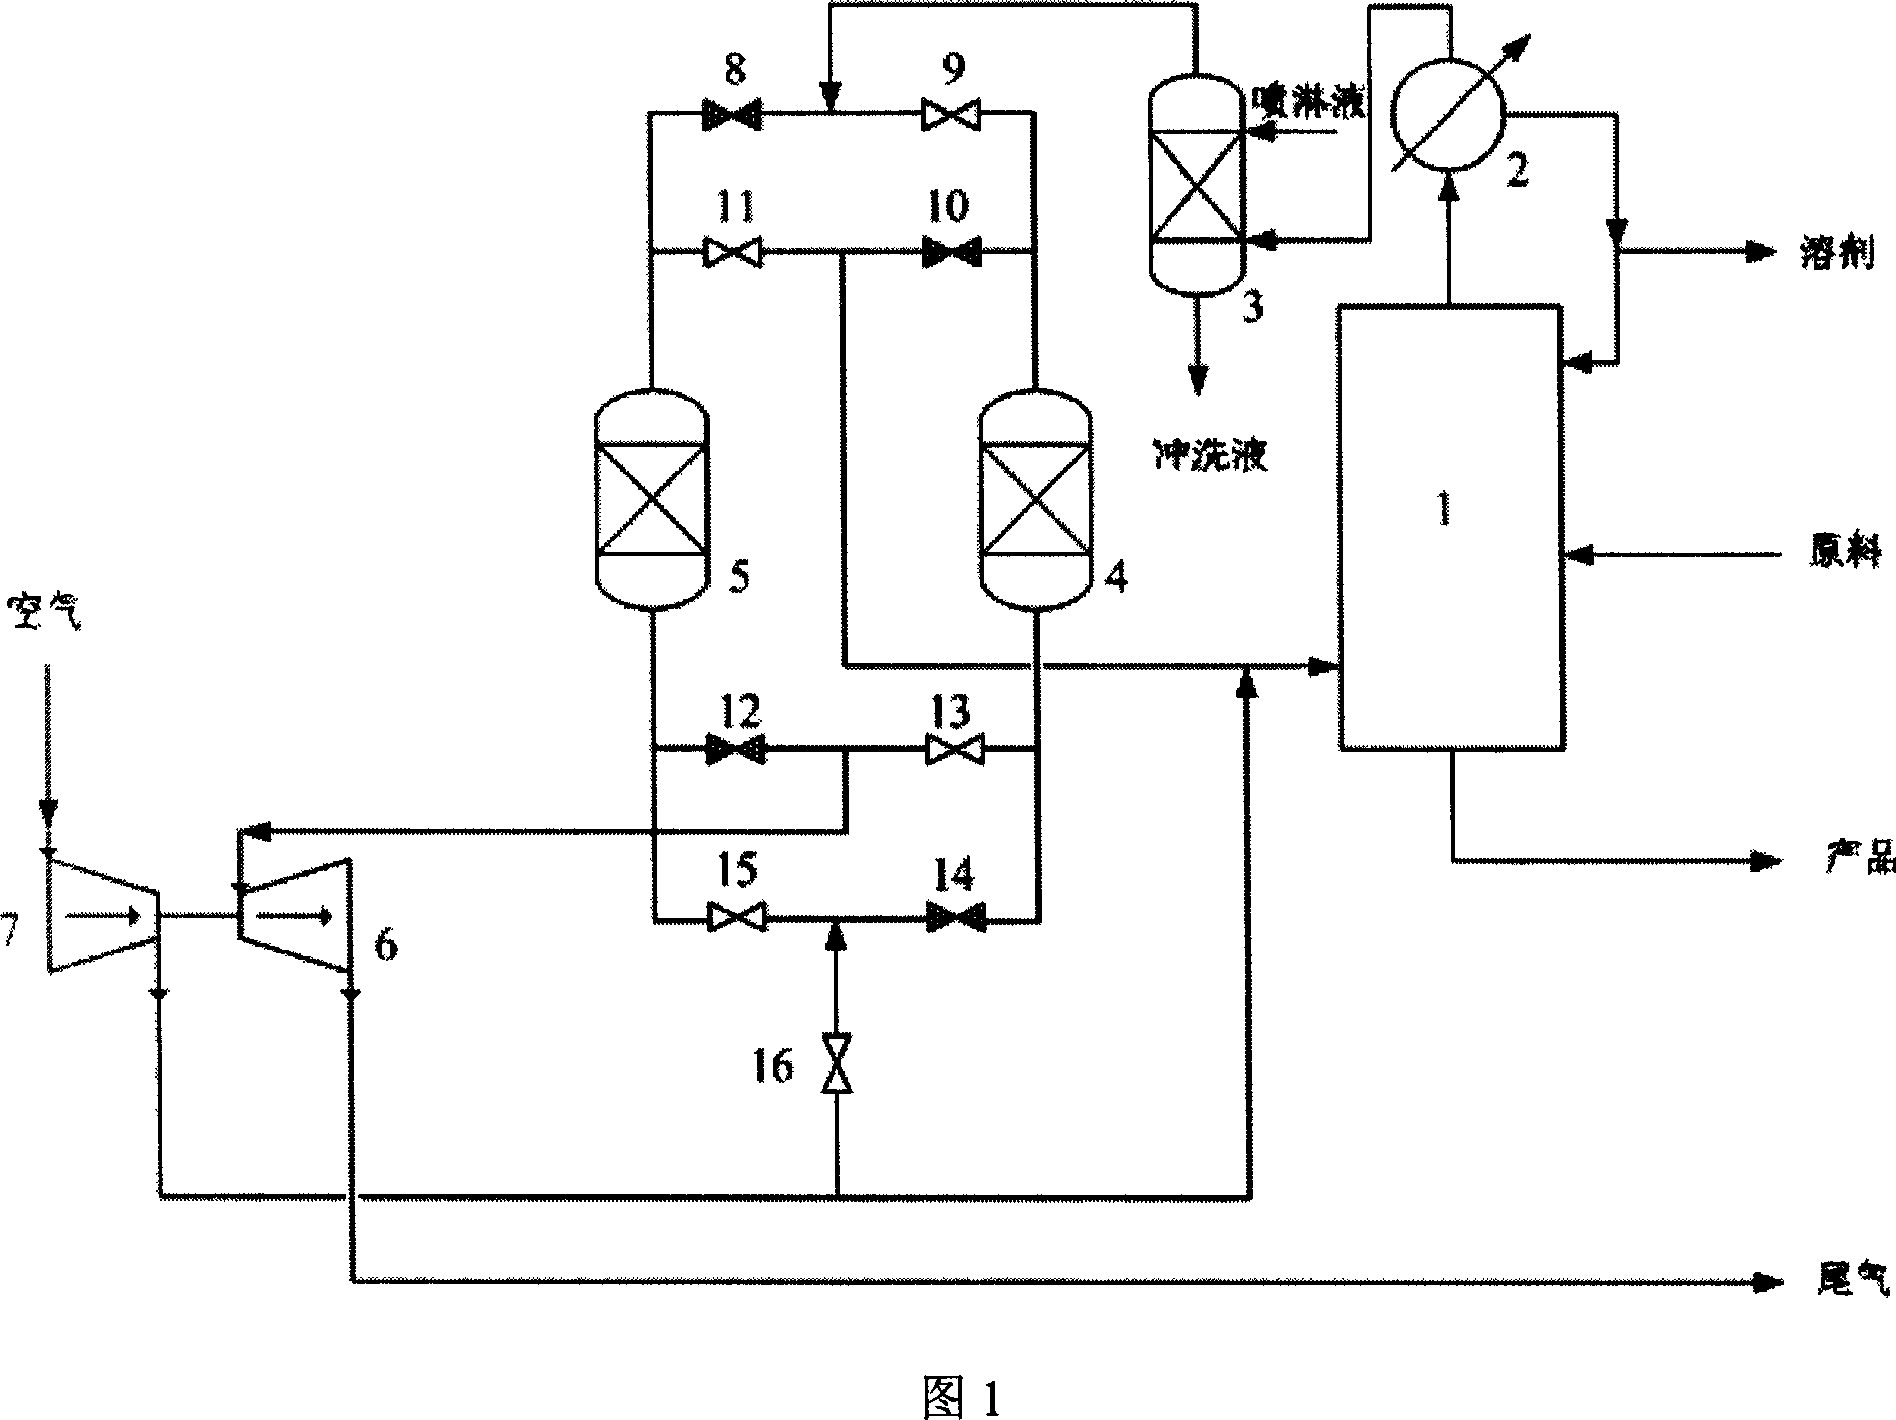 Process and apparatus for purifying arene oxidizing tail gas